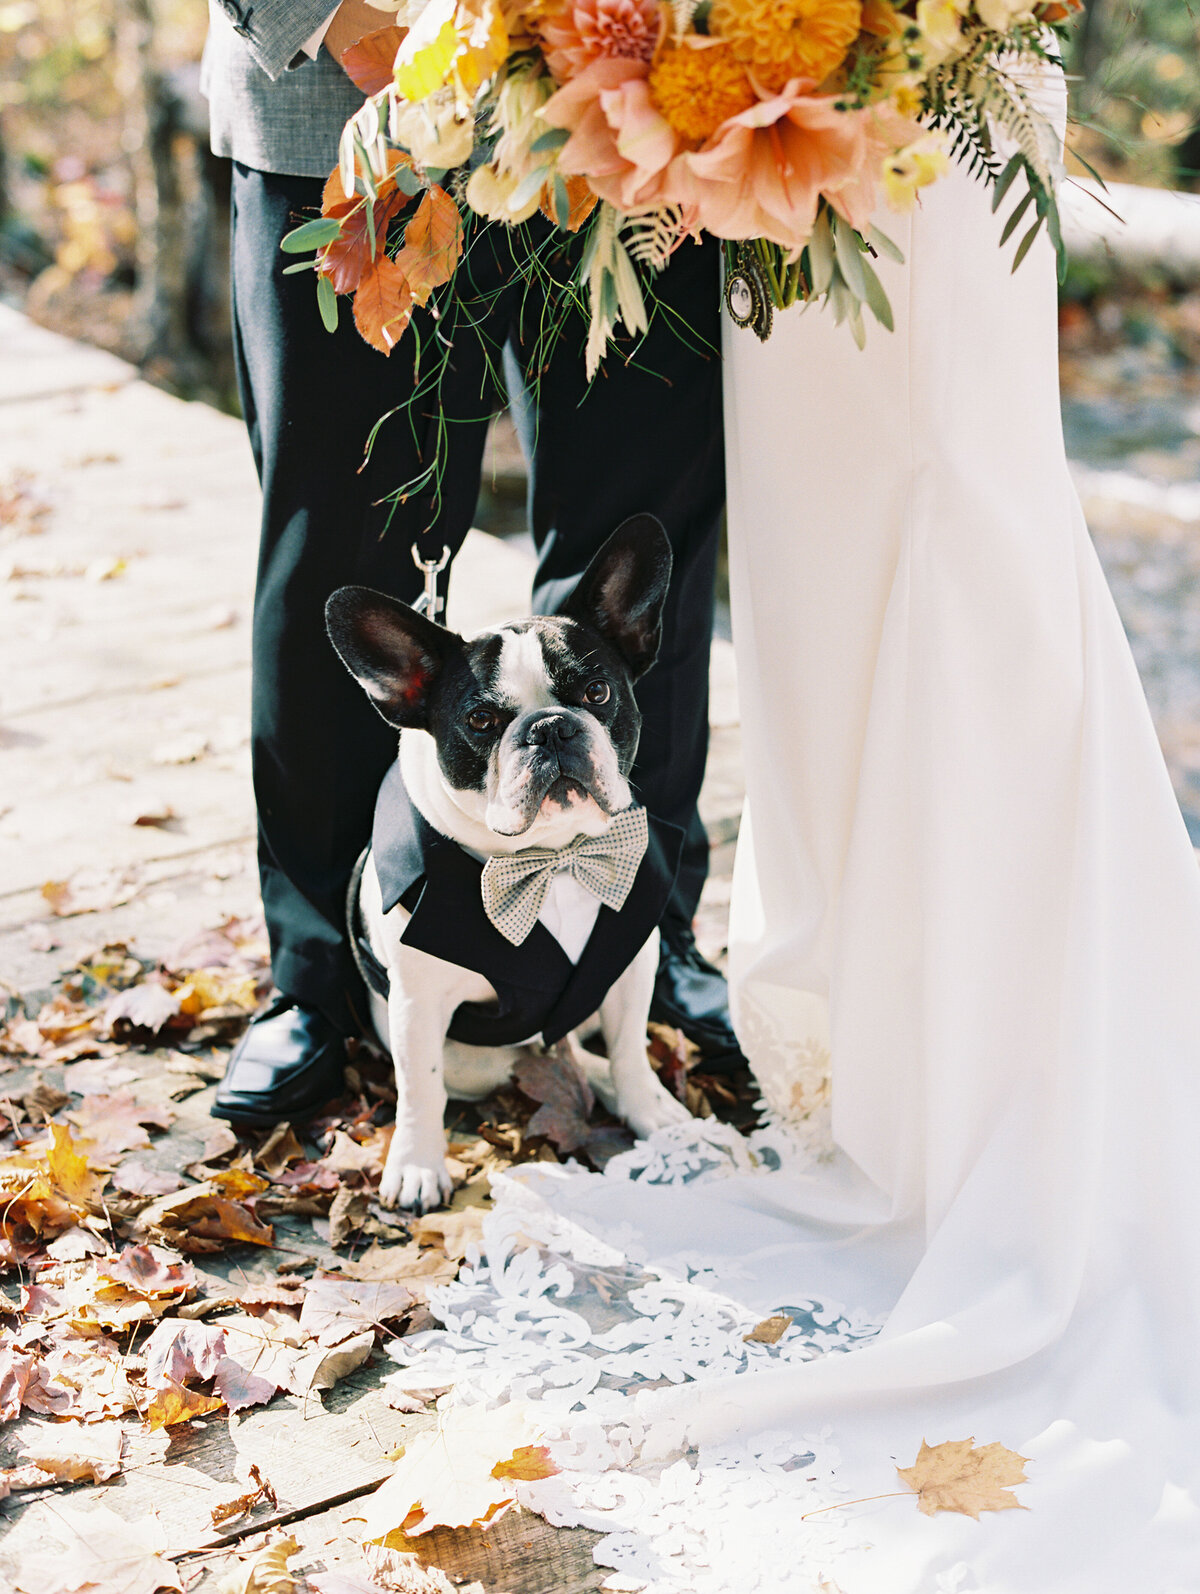 bride and groom with dog at fall wedding at The Horse and Hound Inn, Franconia, New Hampshire.